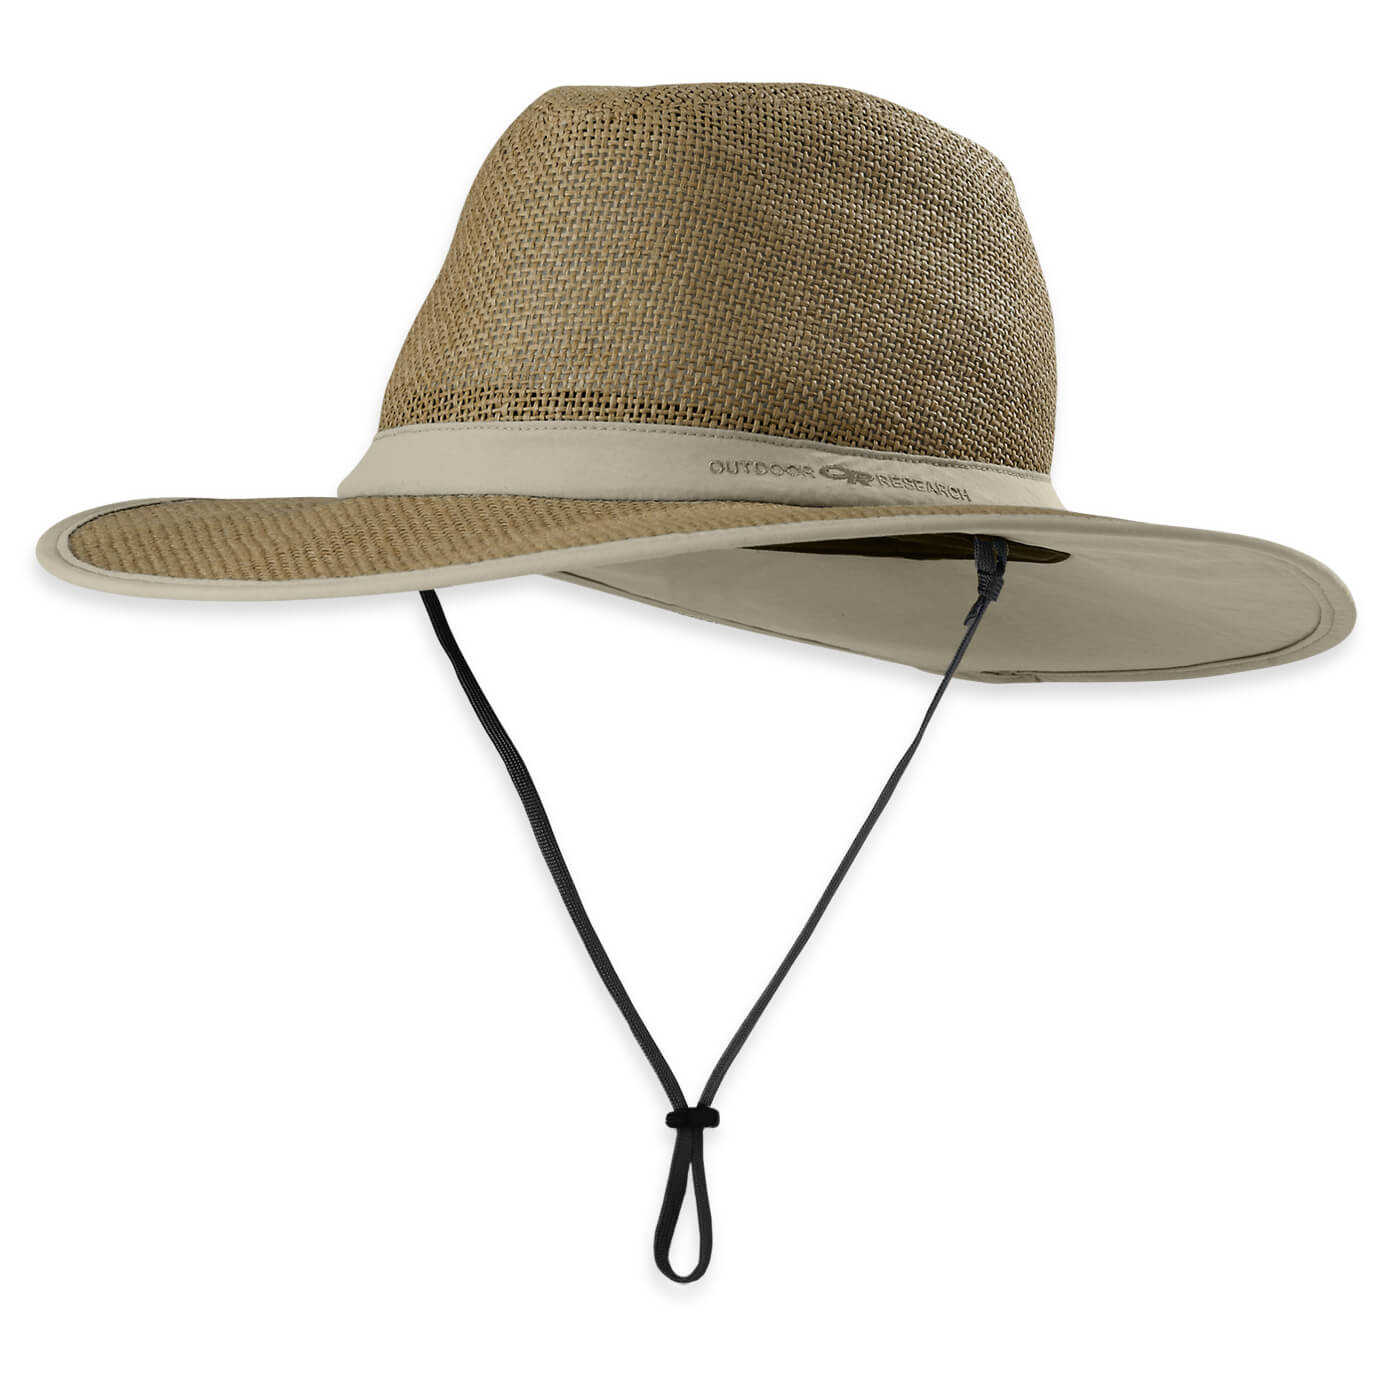 Кепка Outdoor Research Papyrus Brim Sun Hat, хаки